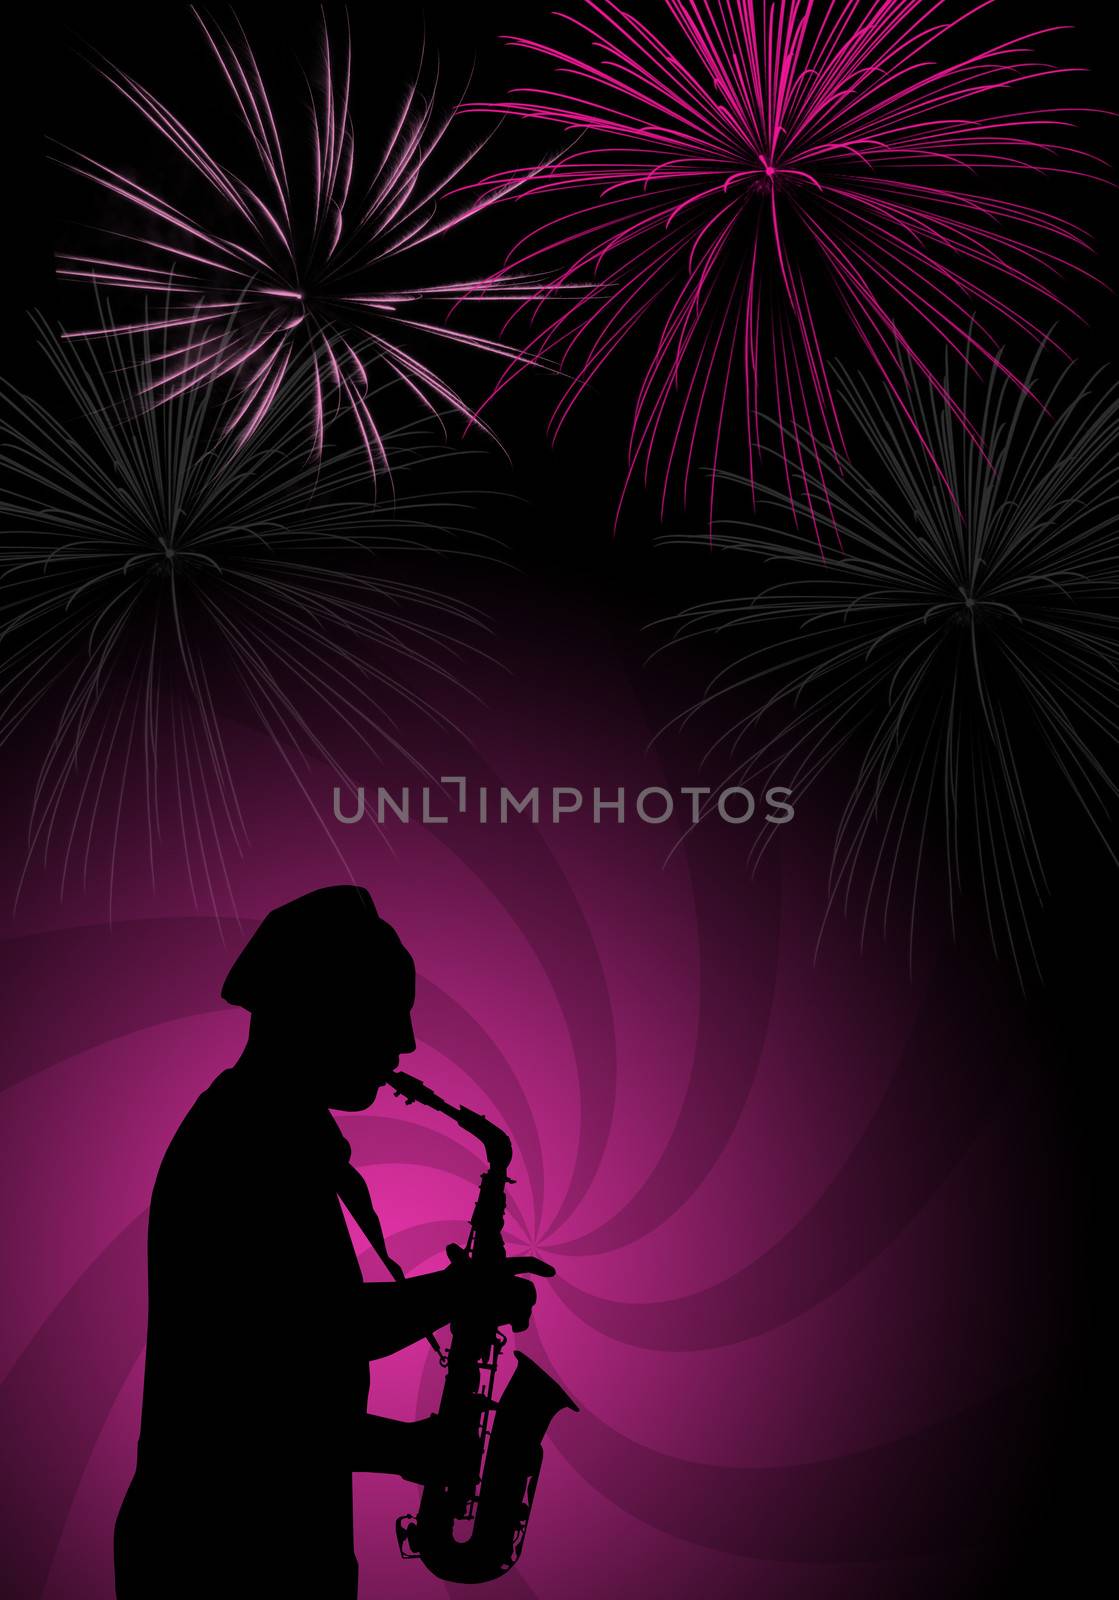 saxophonist to celebrate the new year